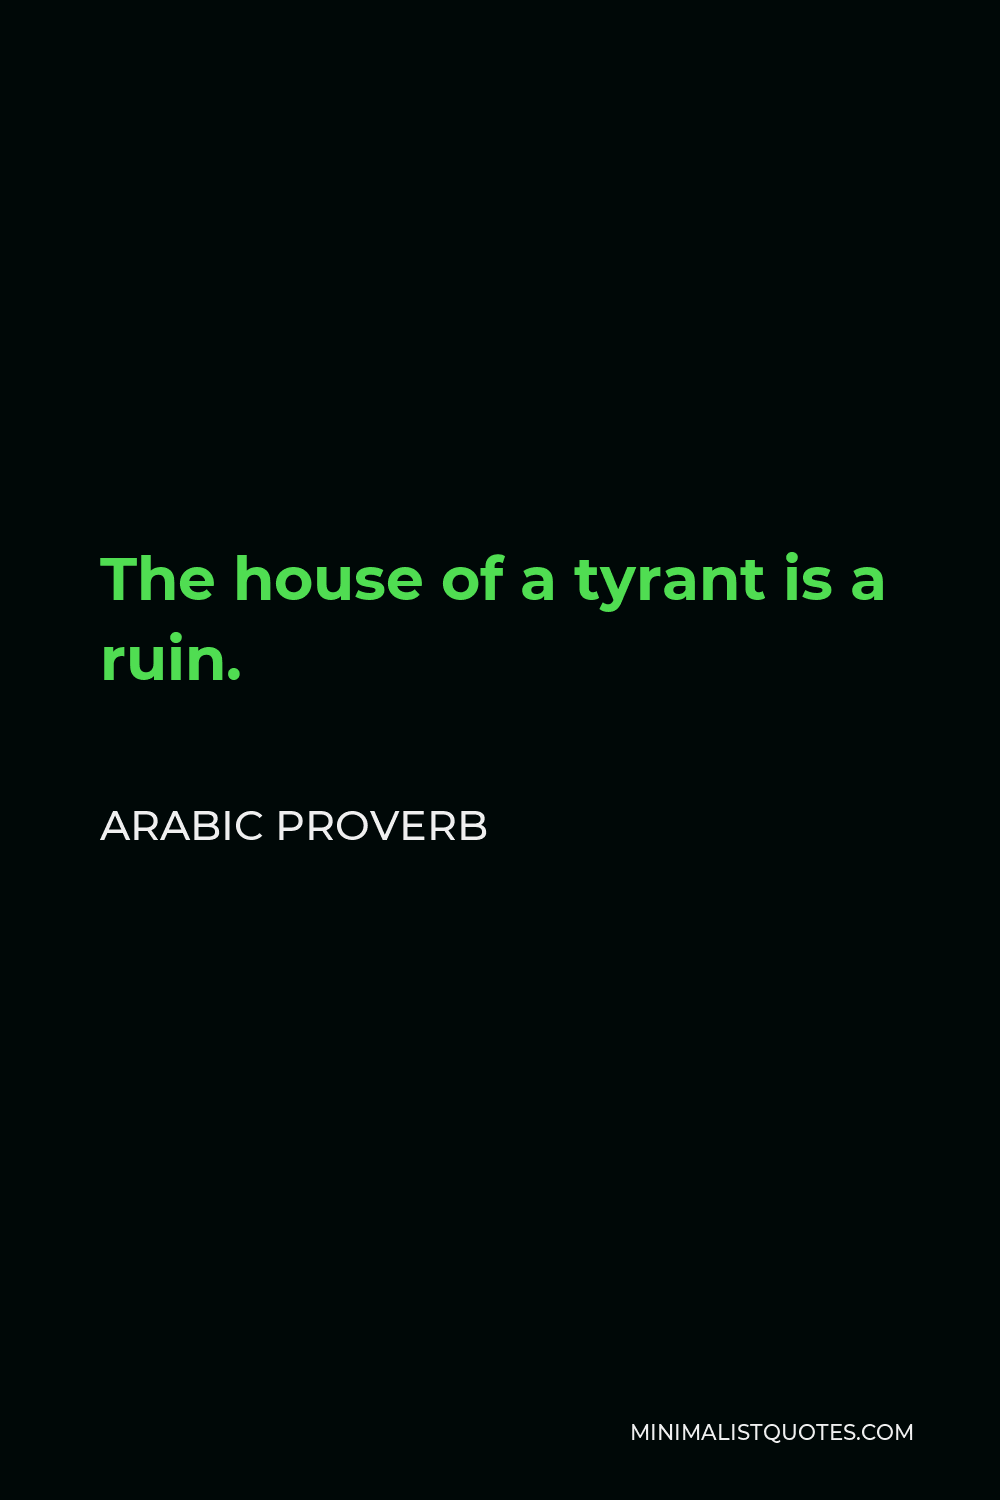 Arabic Proverb Quote - The house of a tyrant is a ruin.